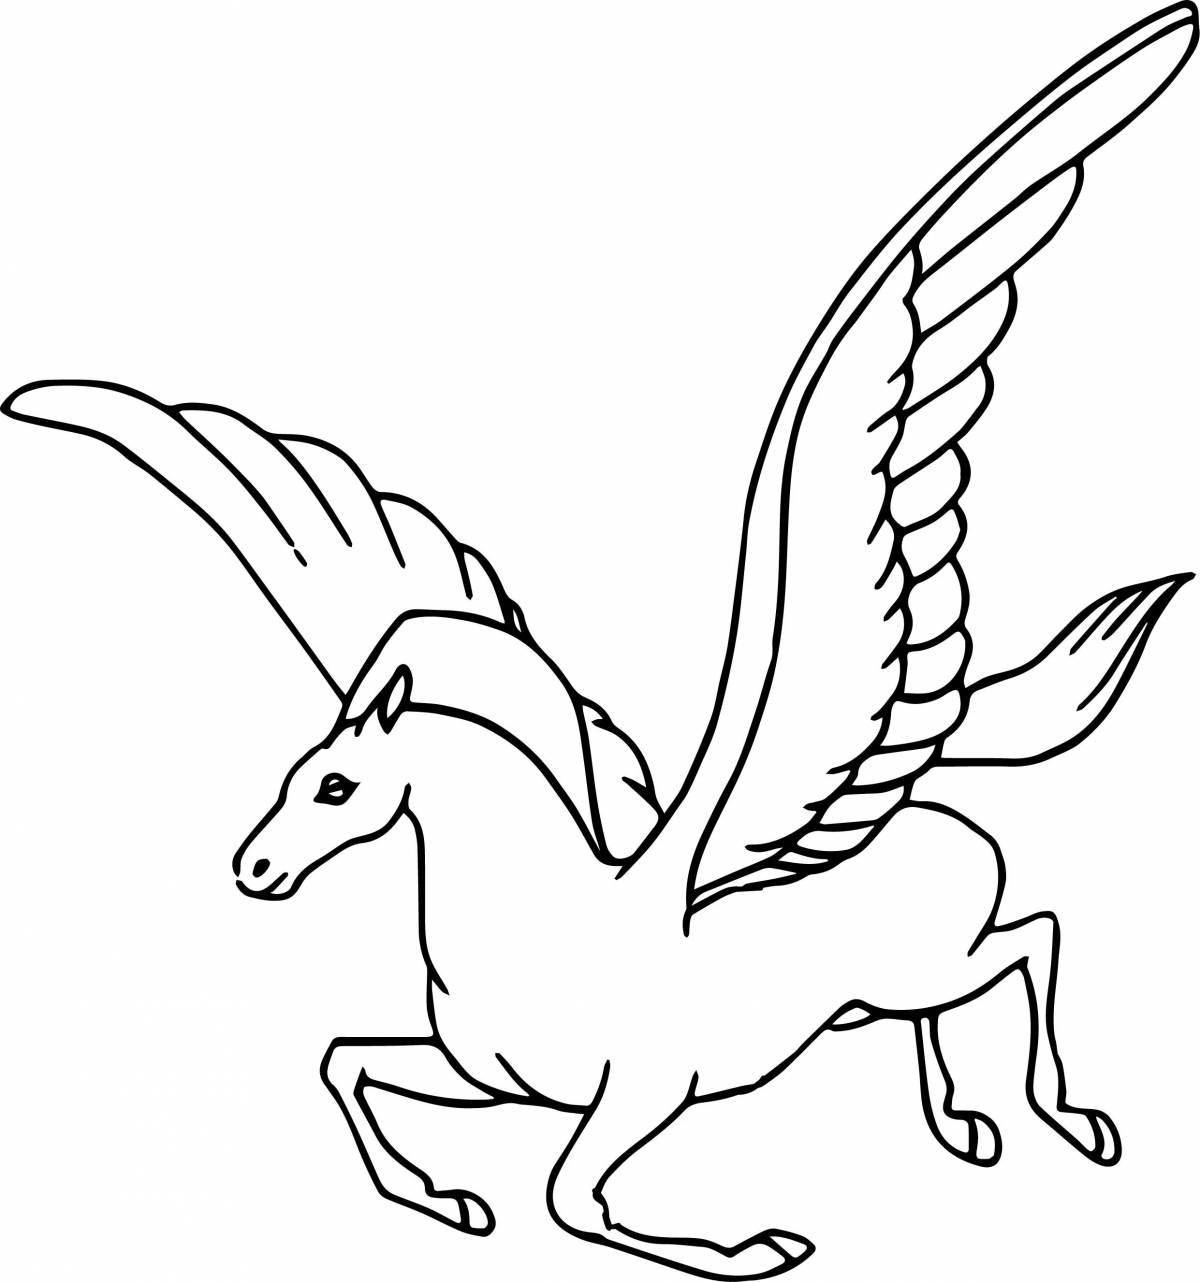 Elegant coloring unicorn with wings for kids